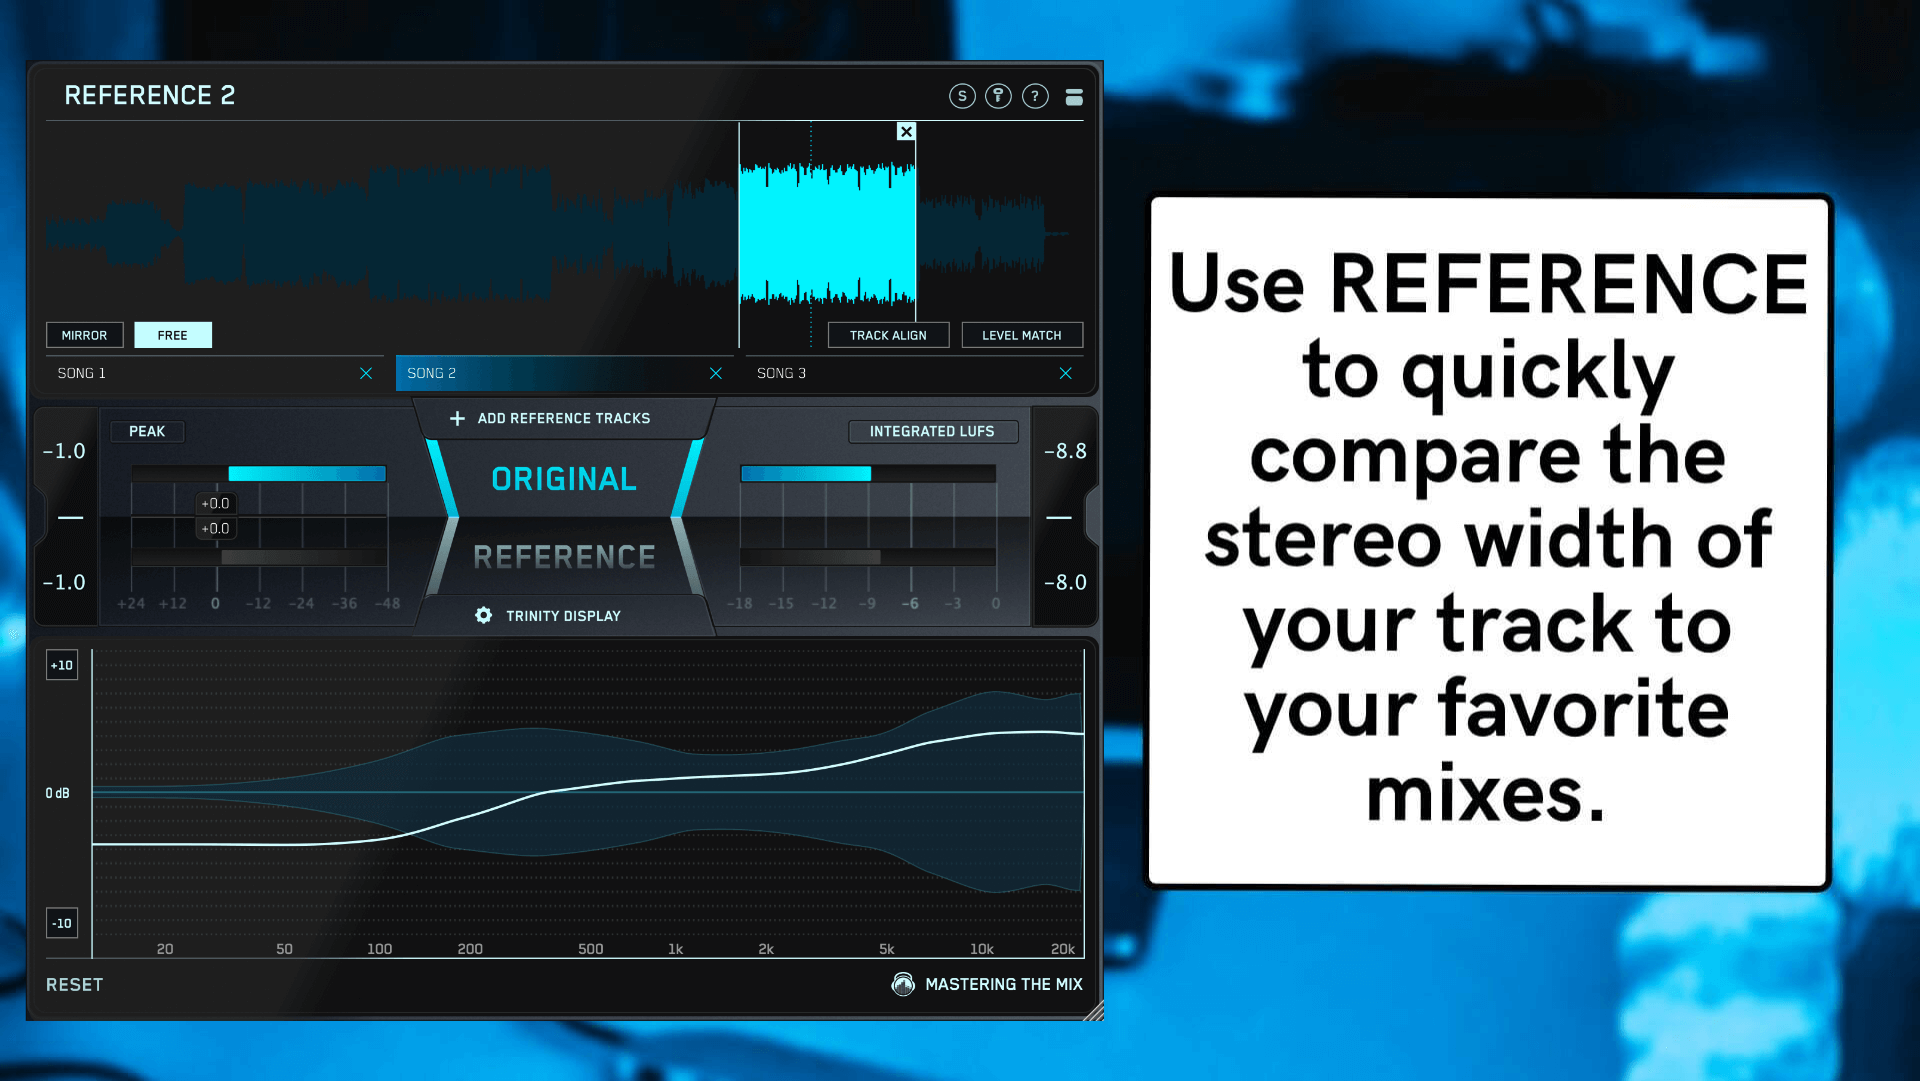 Use Reference Mixes